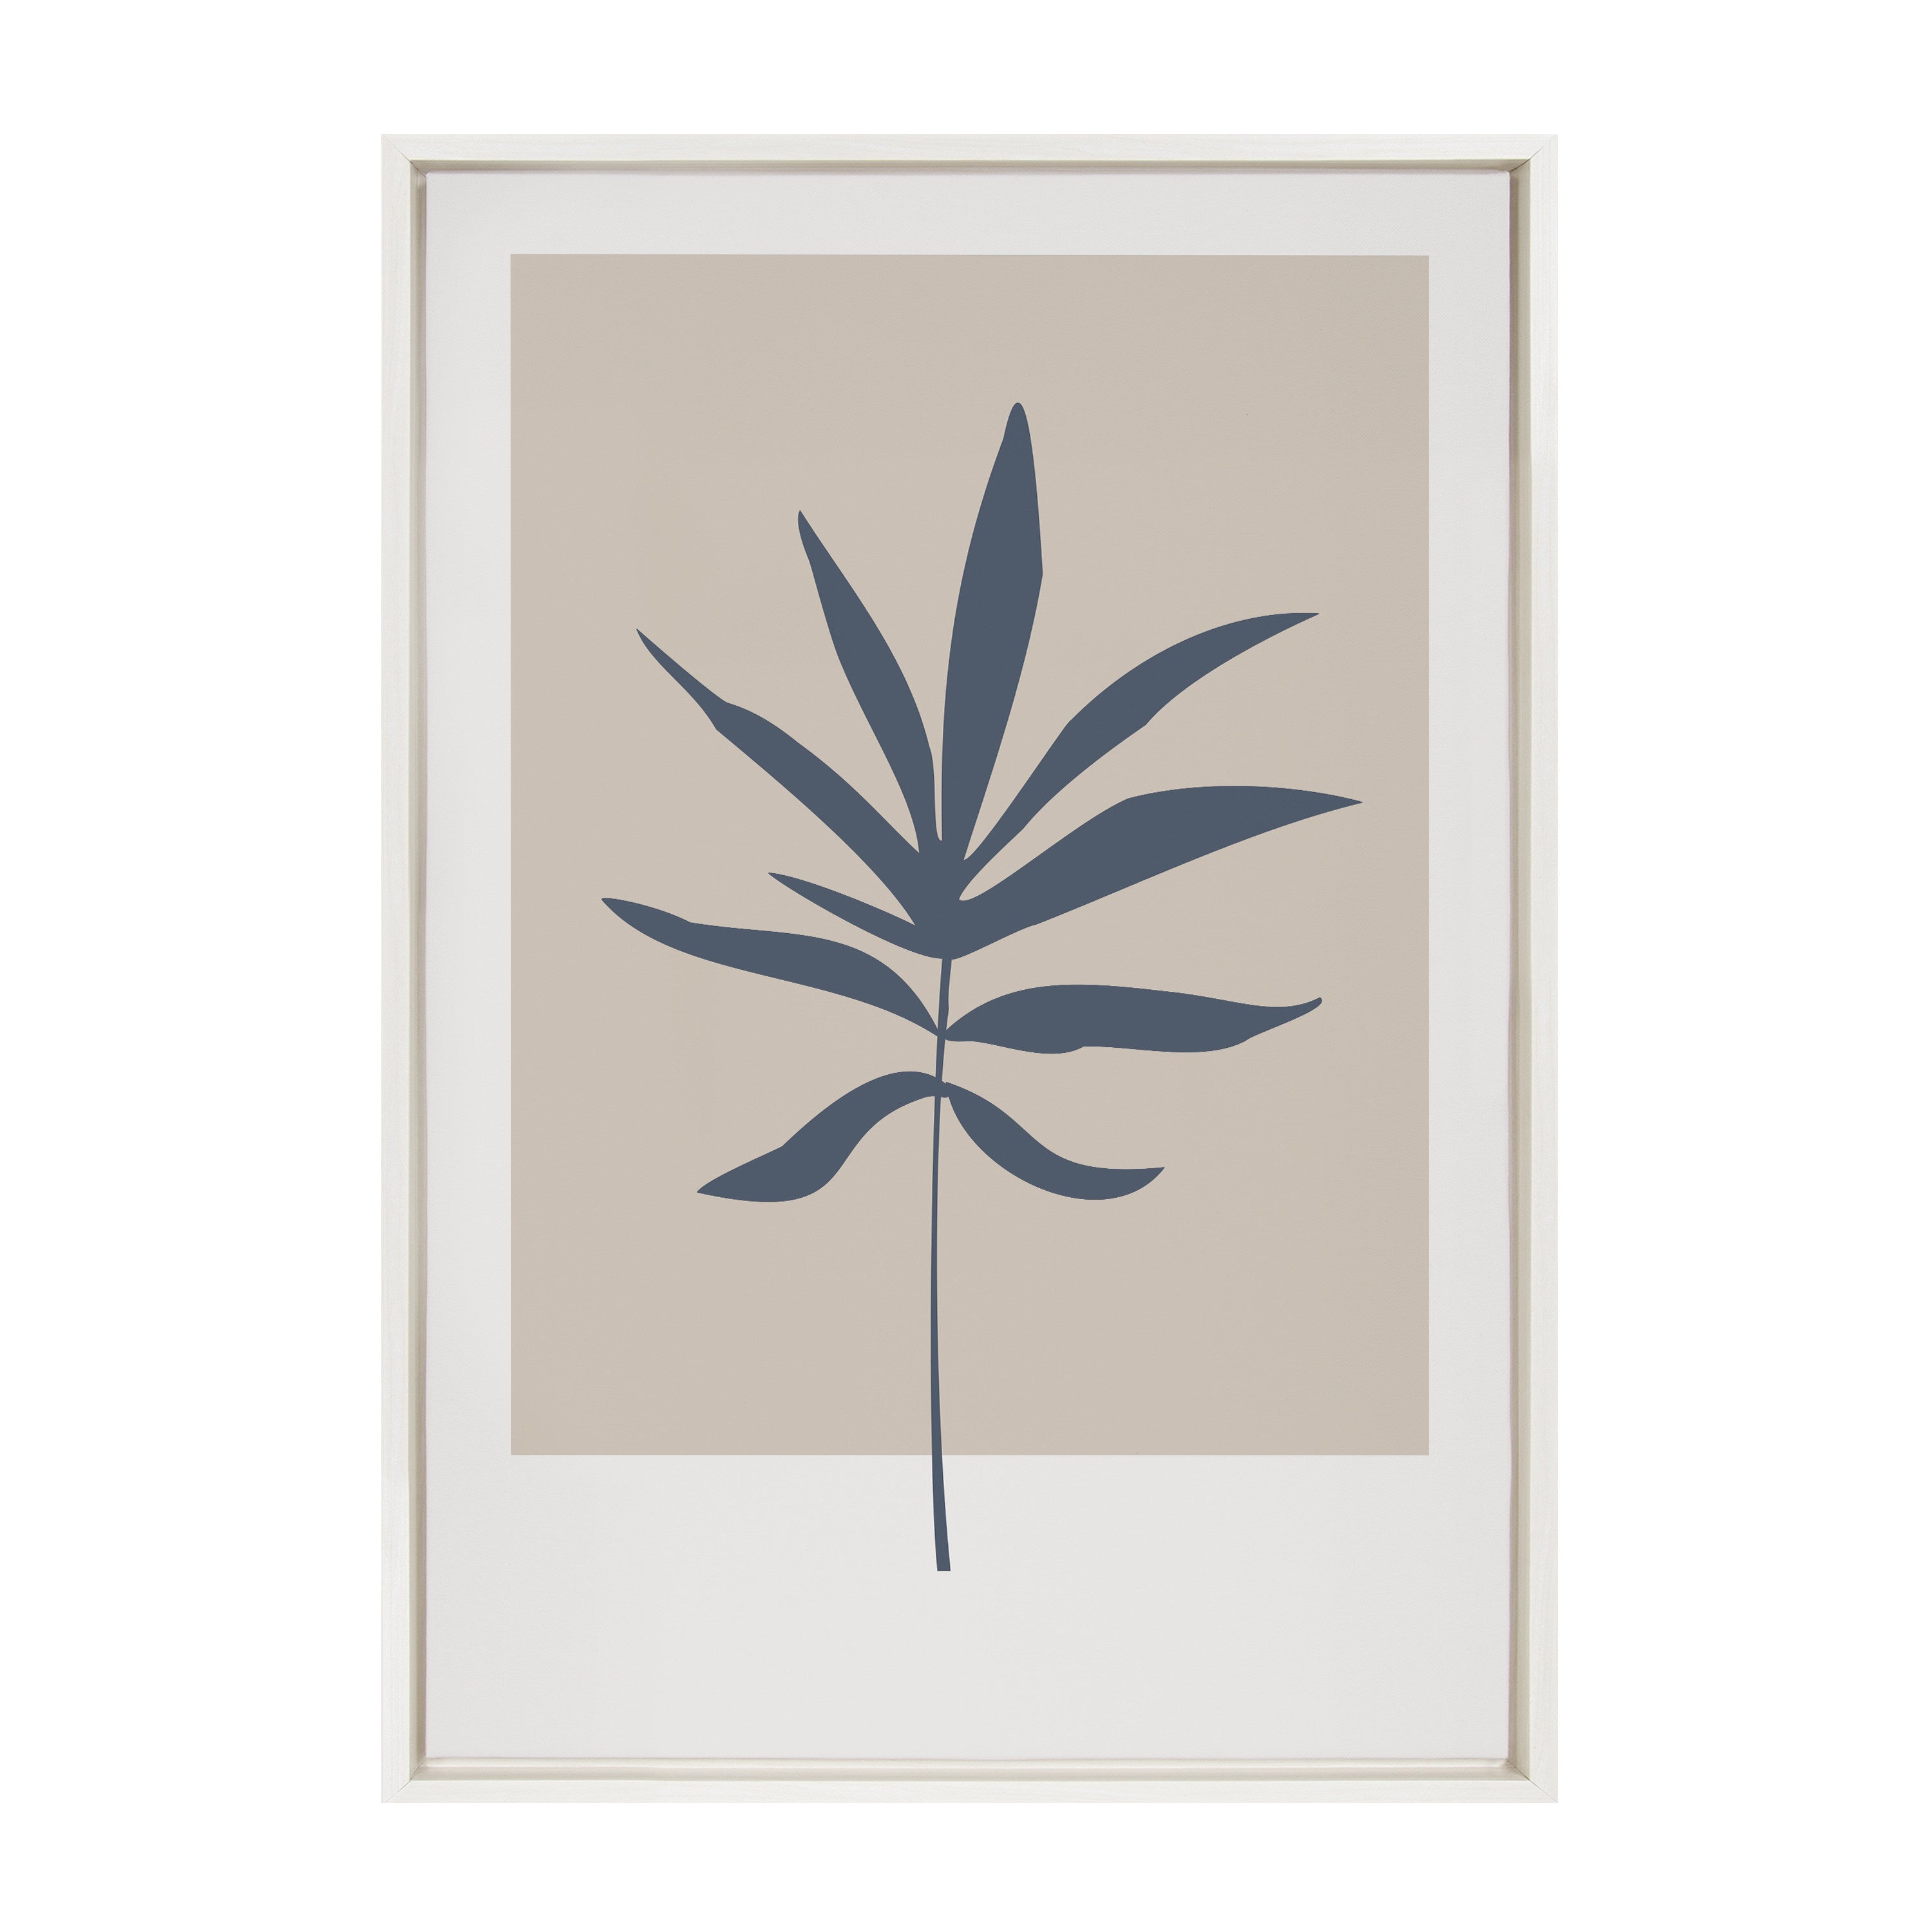 Sylvie Muted Tan and Blue Colorblock Botanical Leaf Framed Canvas by The Creative Bunch Studio